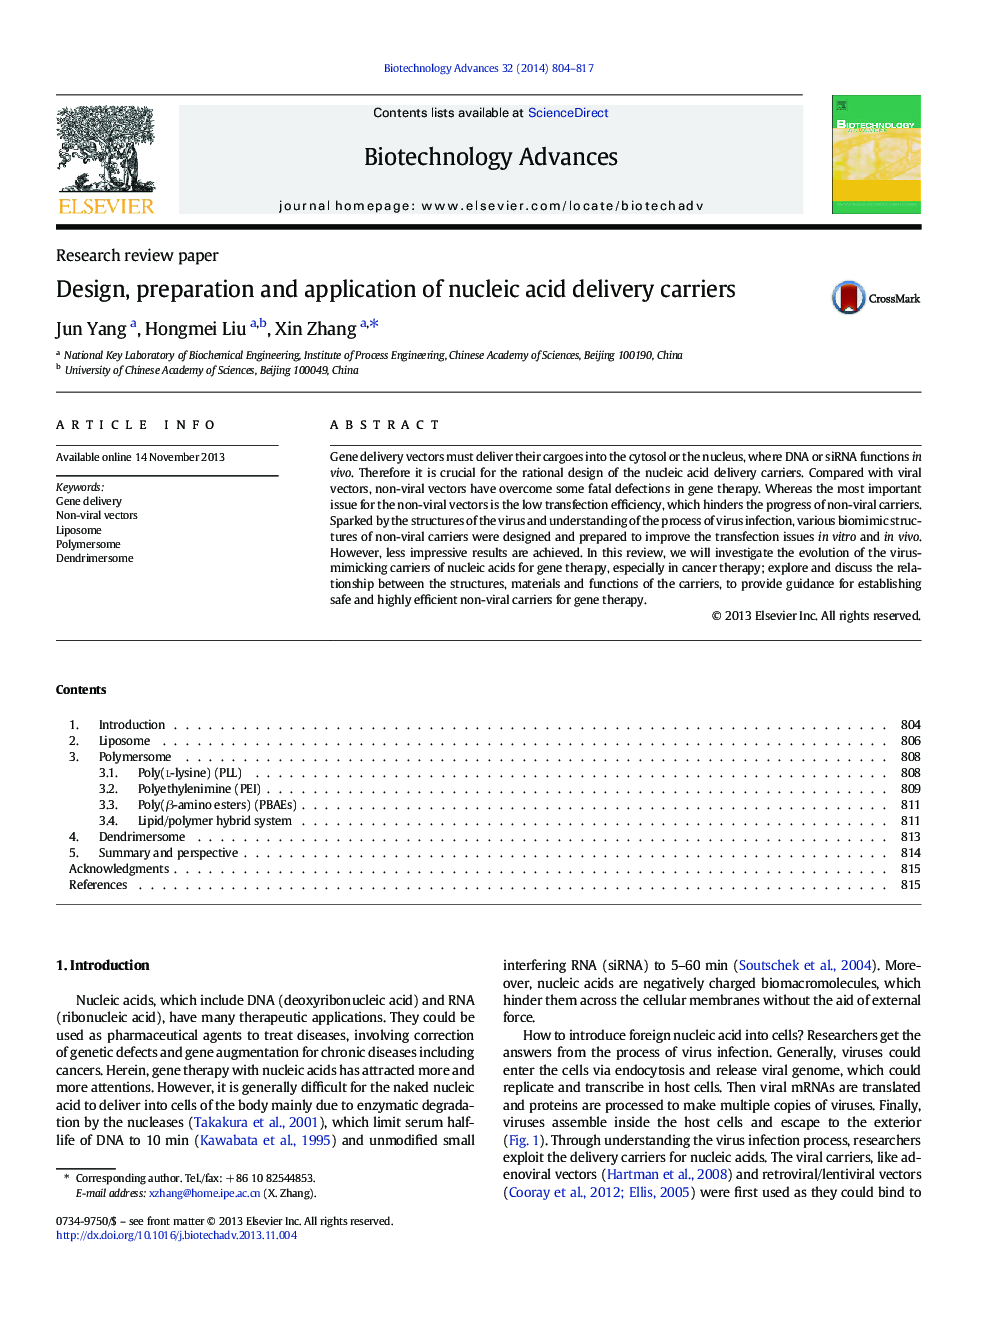 Design, preparation and application of nucleic acid delivery carriers